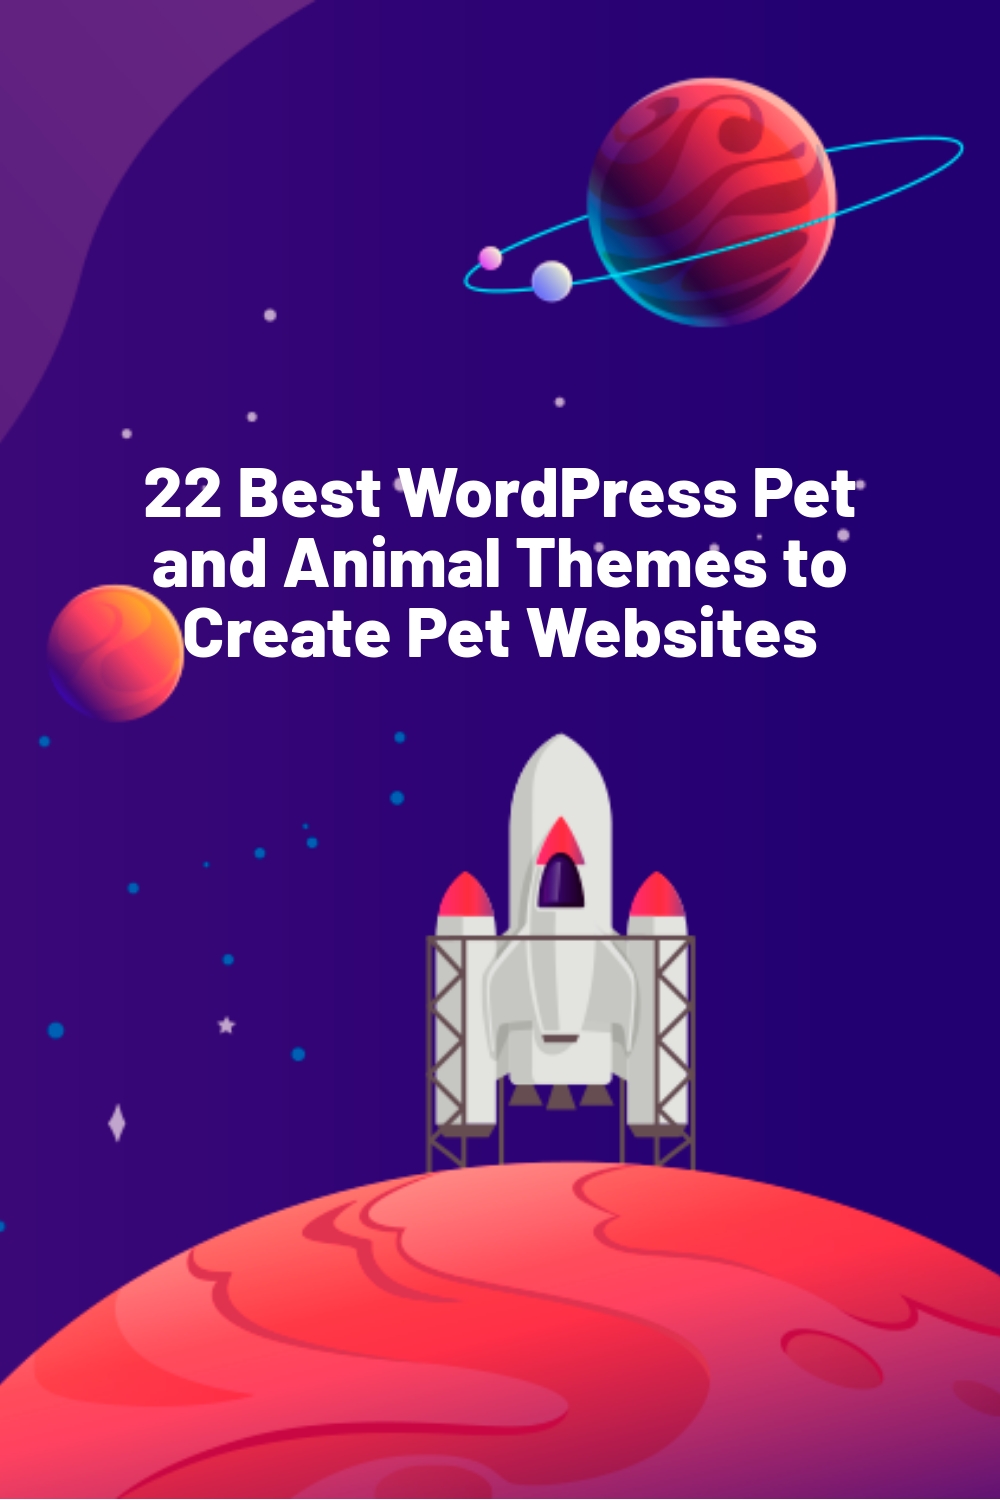 22 Best WordPress Pet and Animal Themes to Create Pet Websites